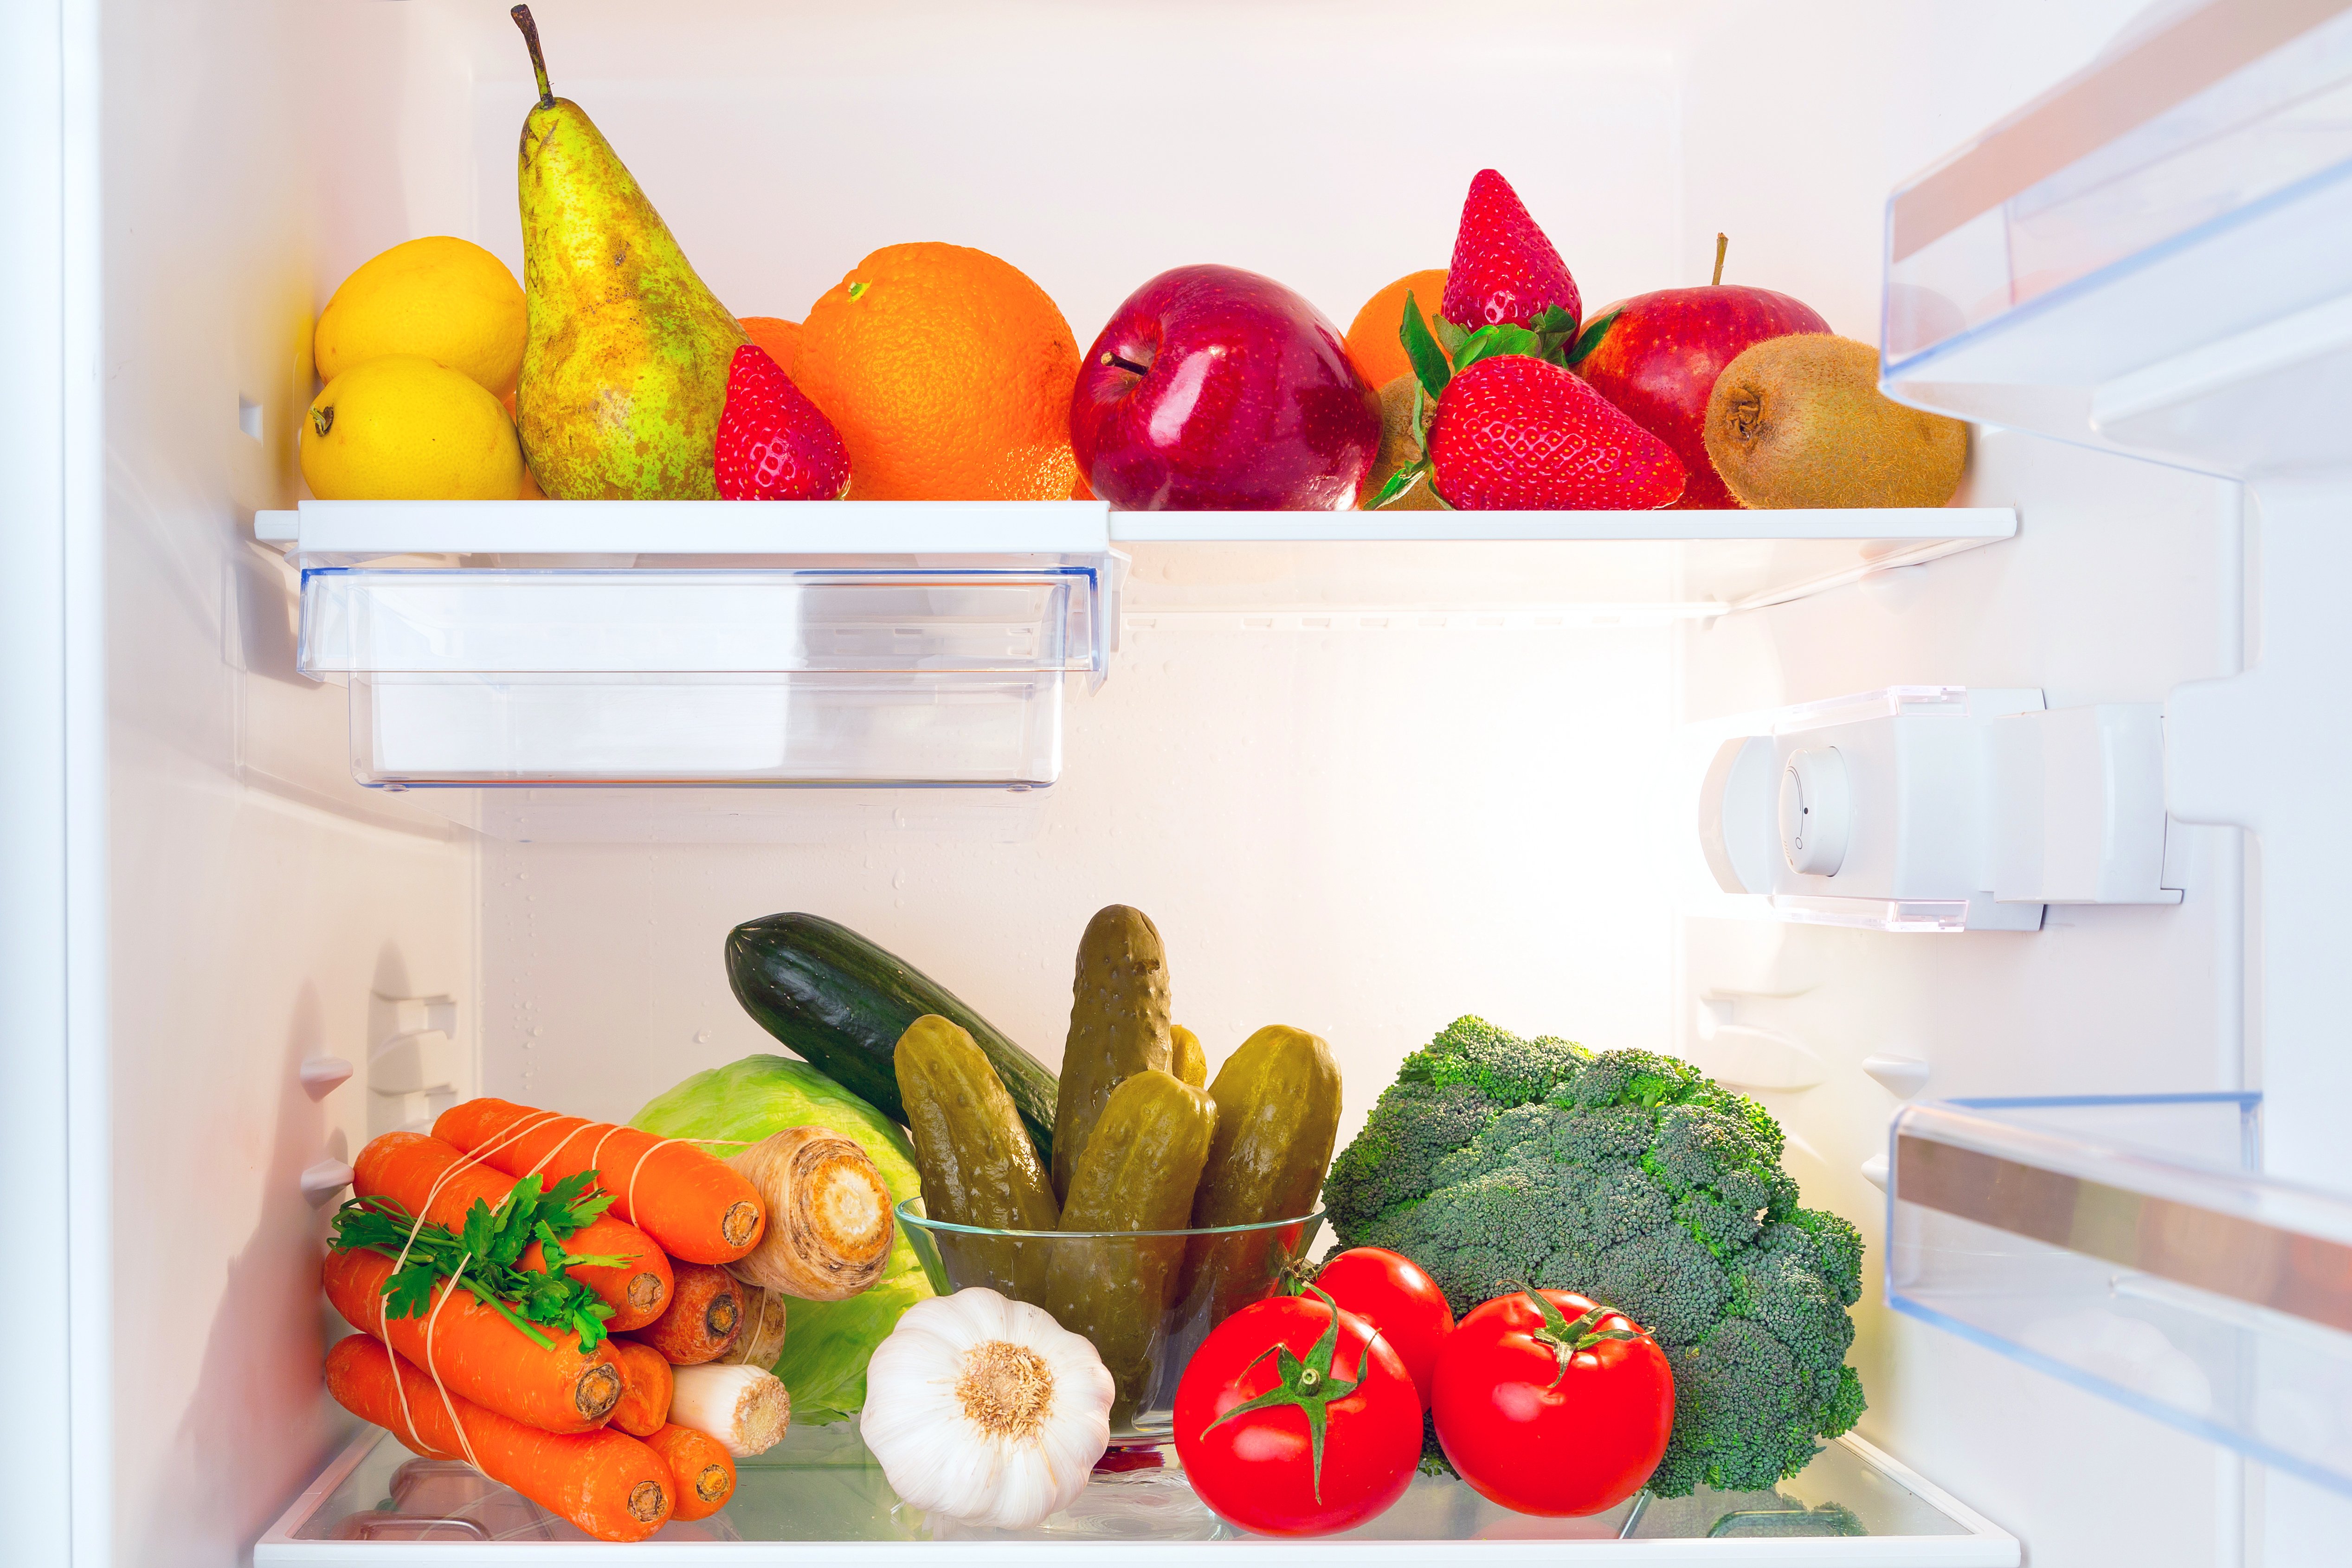 Fruits and vegetables in refrigerator | Shutterstock